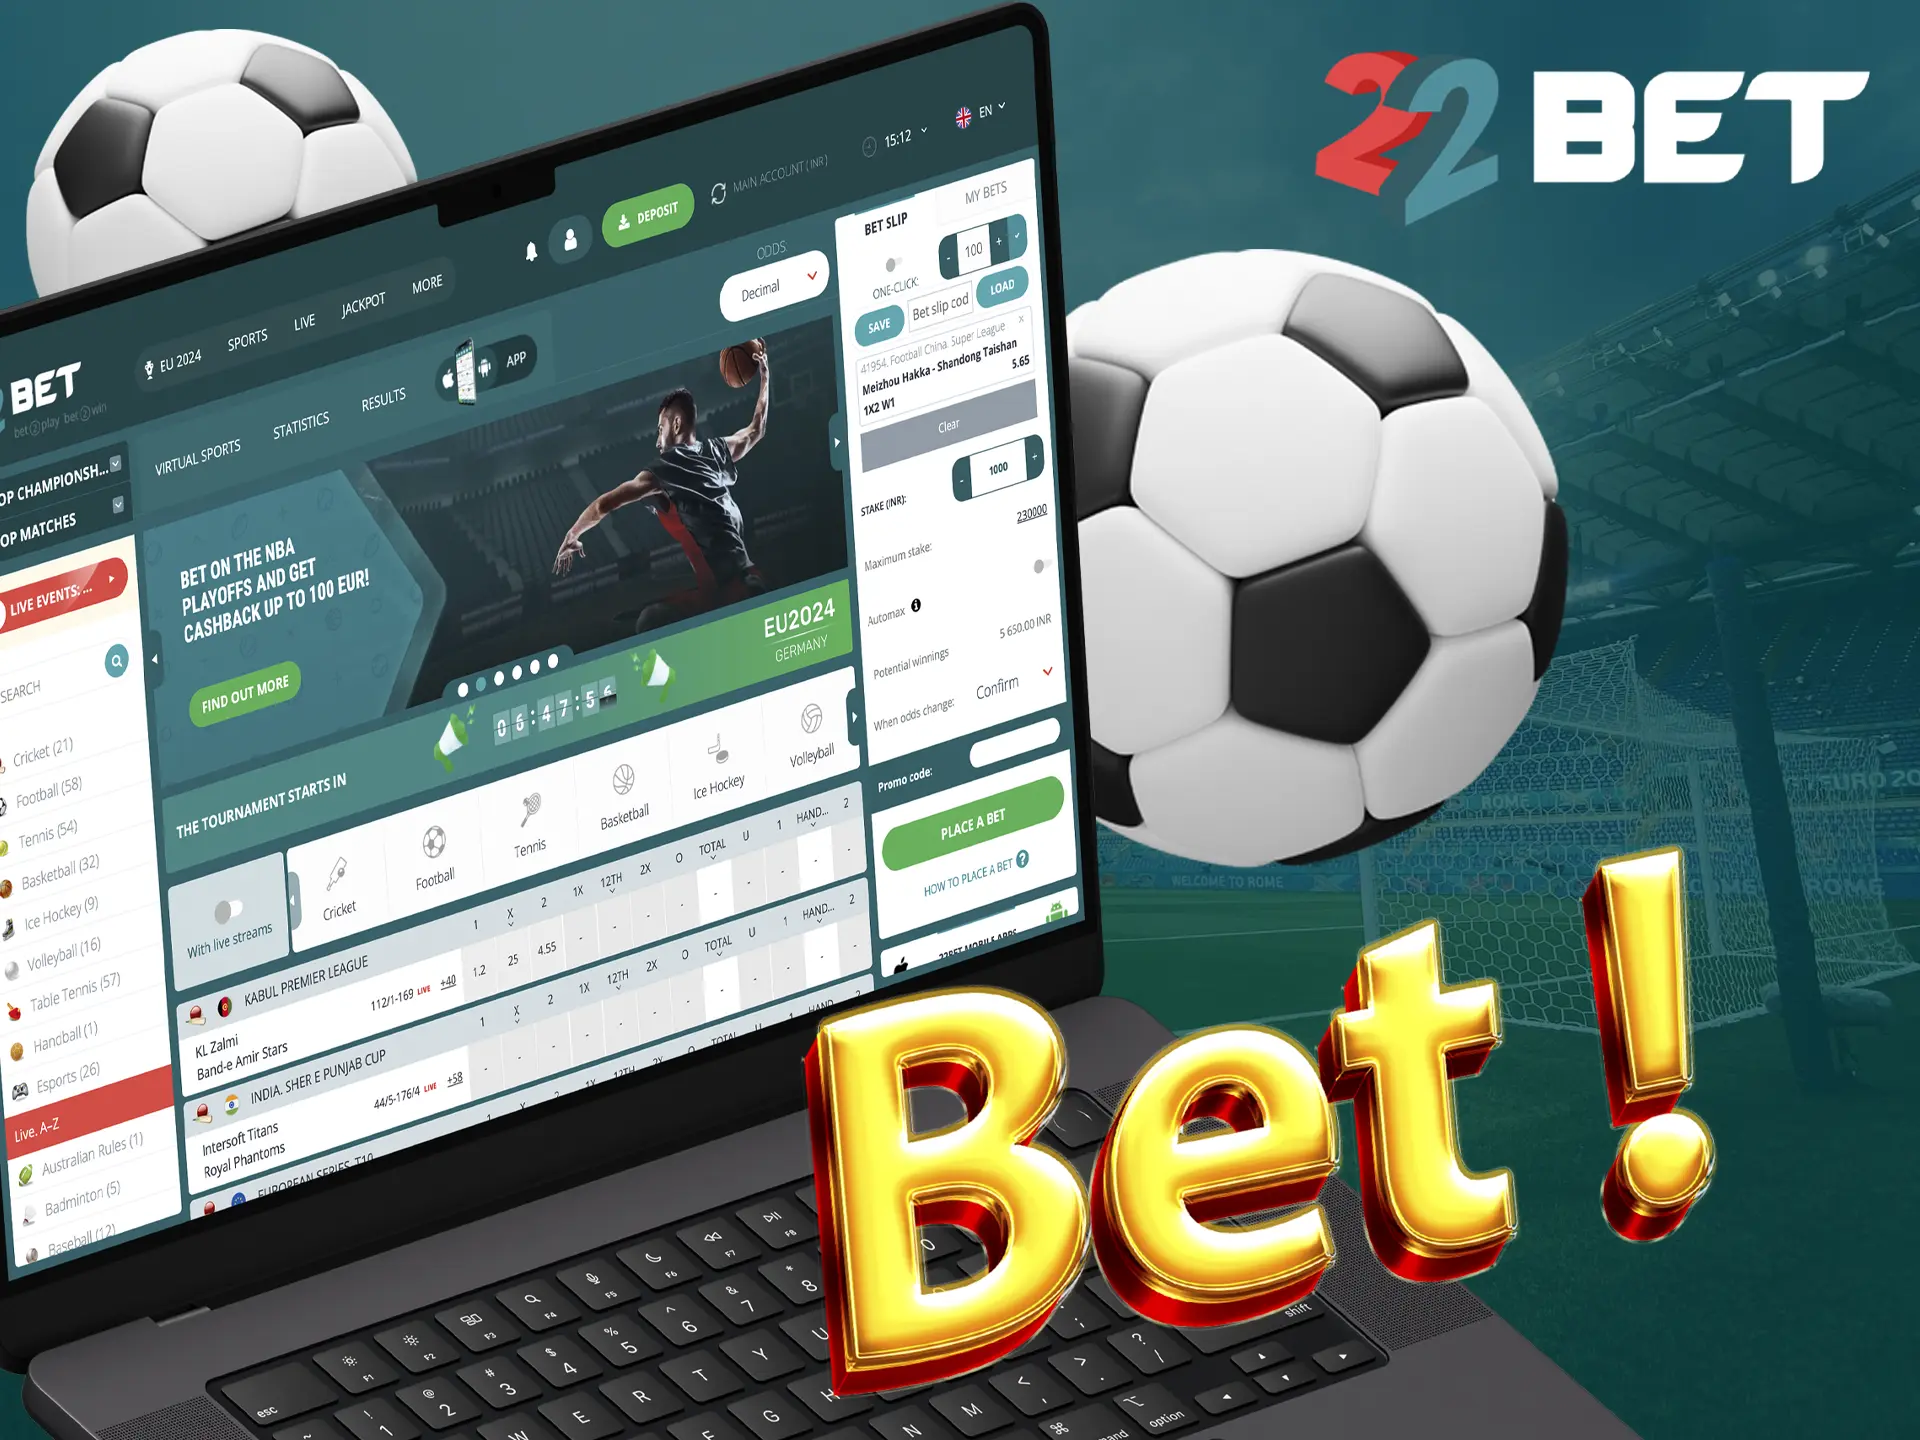 Place your bet at 22Bet and go live to watch your favourite team play.